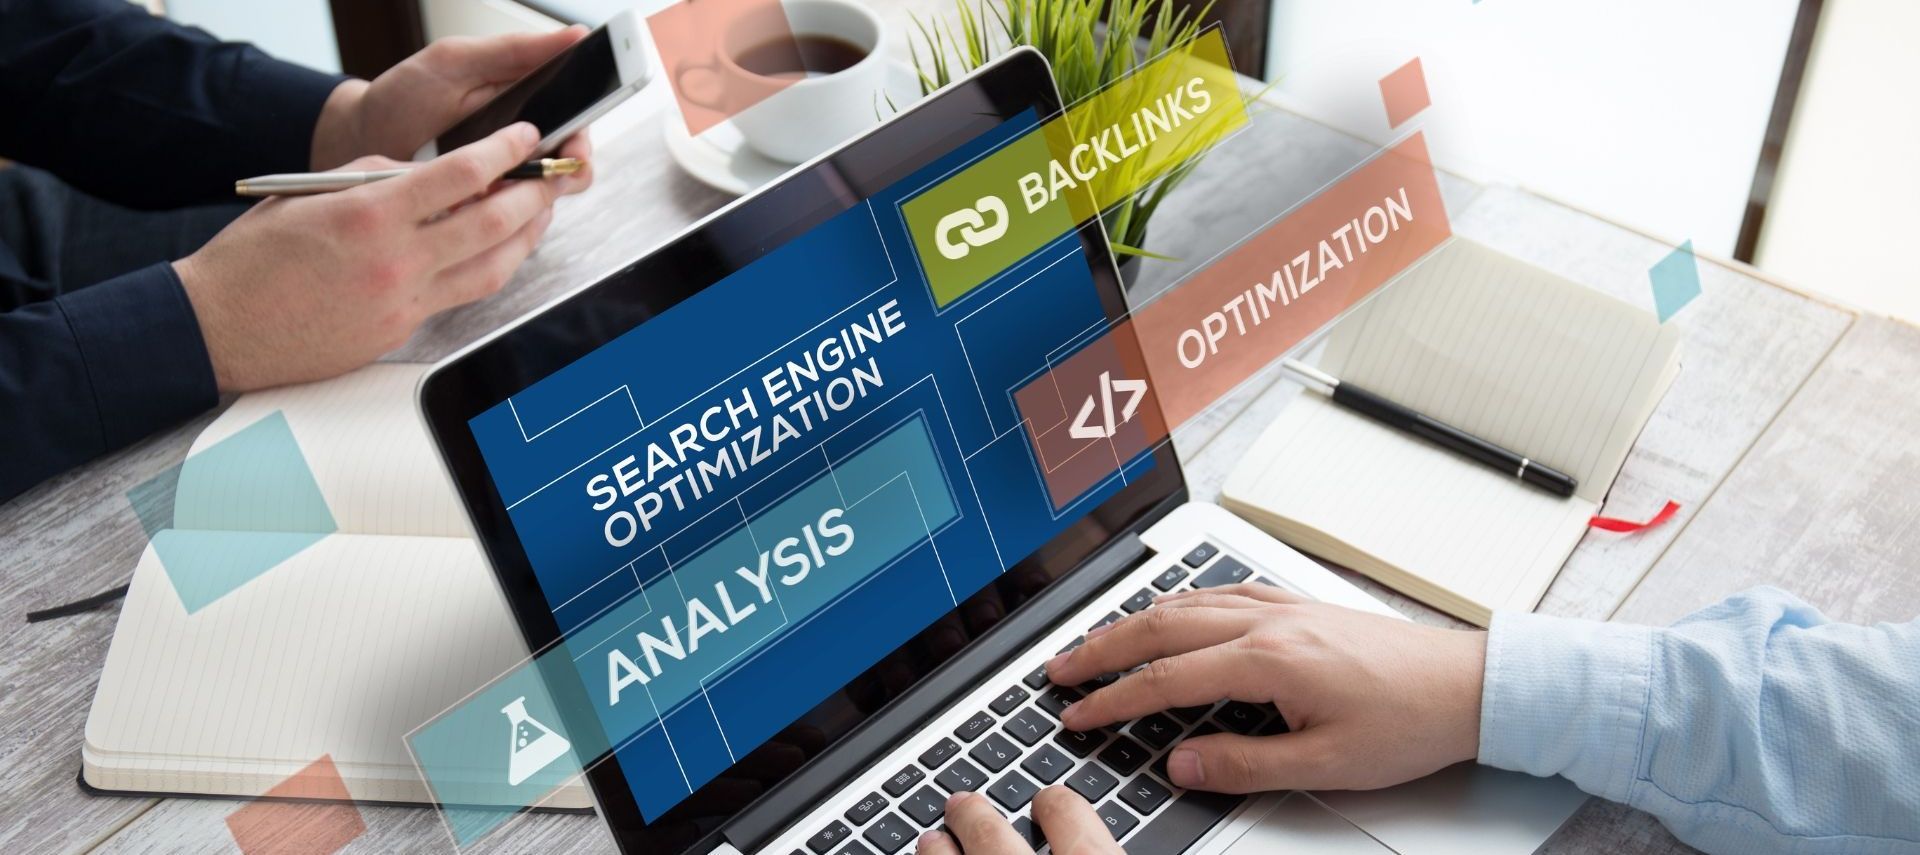 a person is typing on a laptop that says search engine optimization analysis and backlinks